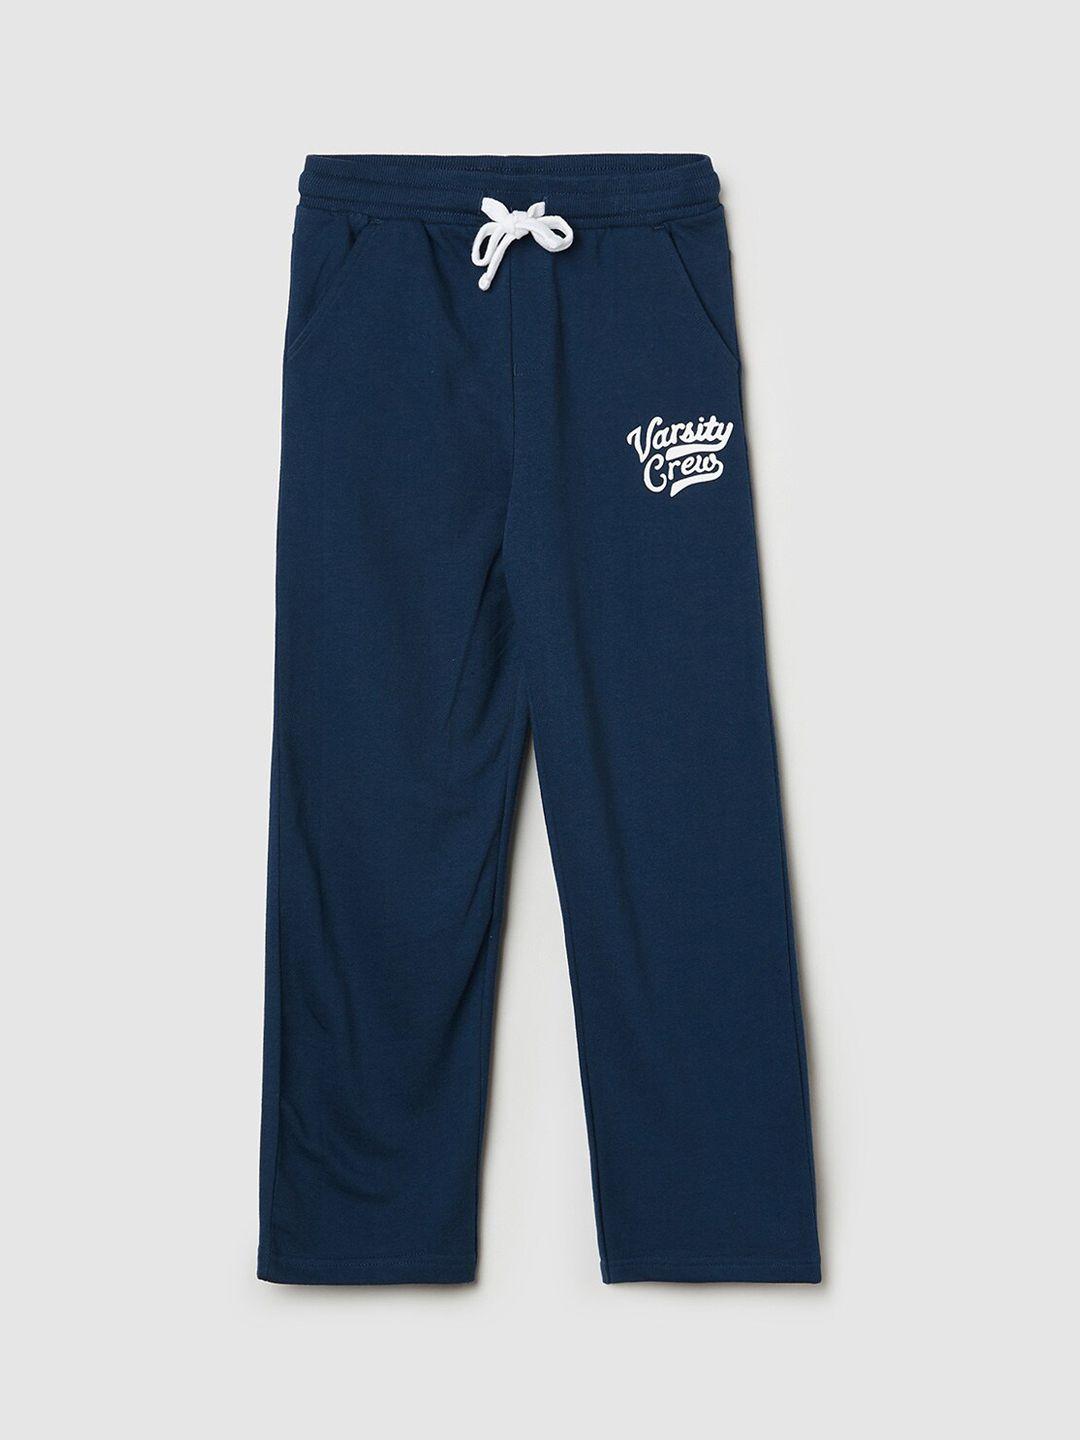 max-boys-navy-blue-solid-pure-cotton-track-pants